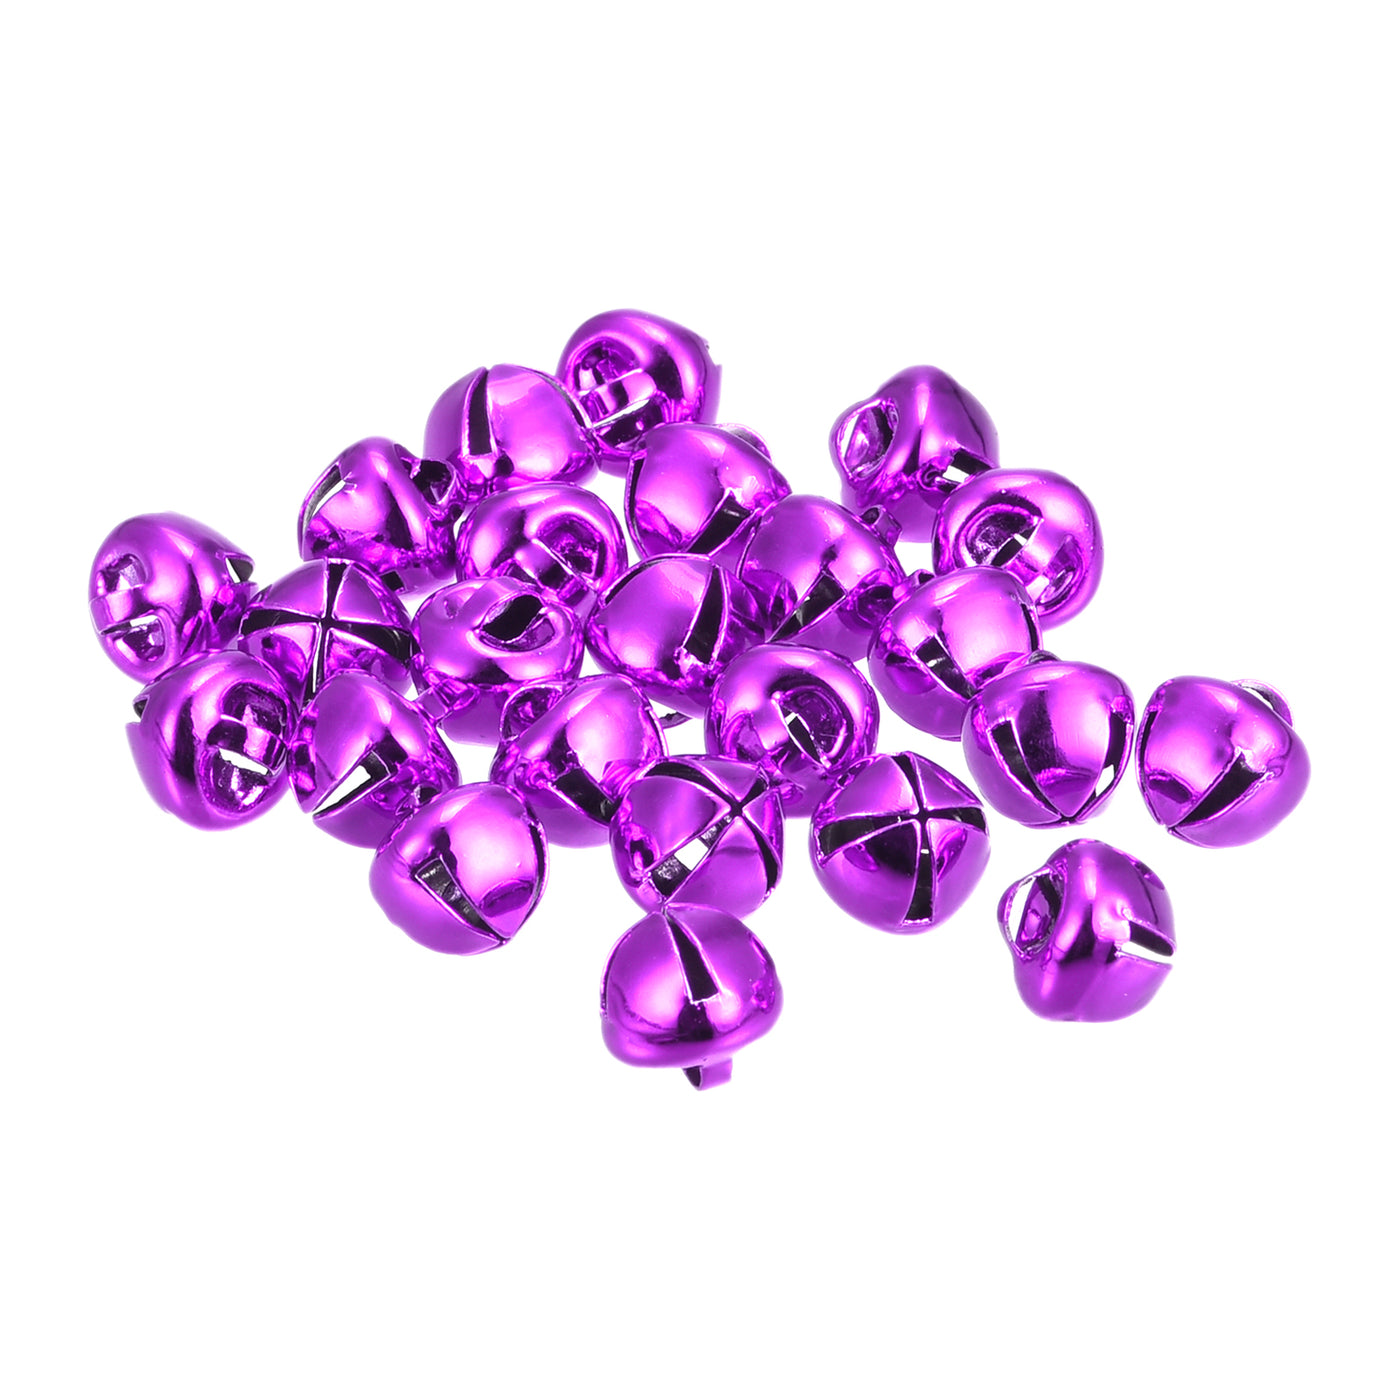 uxcell Uxcell Jingle Bells, 8mm 24pcs Small Bells for Crafts DIY Christmas, Purple